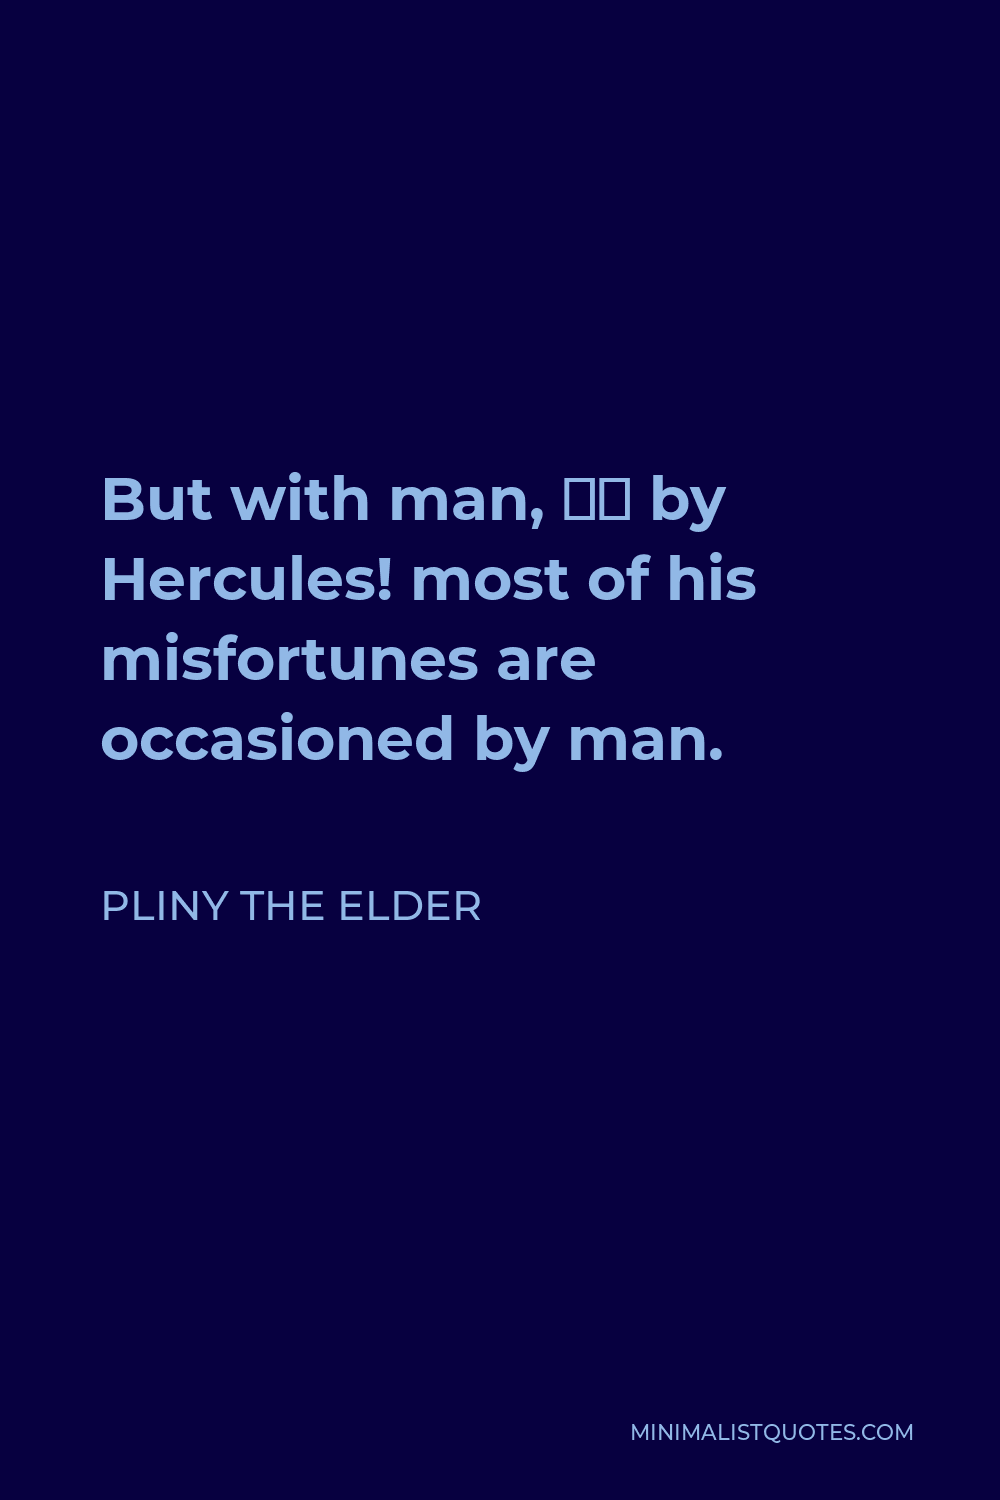 Pliny the Elder Quote - But with man, — by Hercules! most of his misfortunes are occasioned by man.